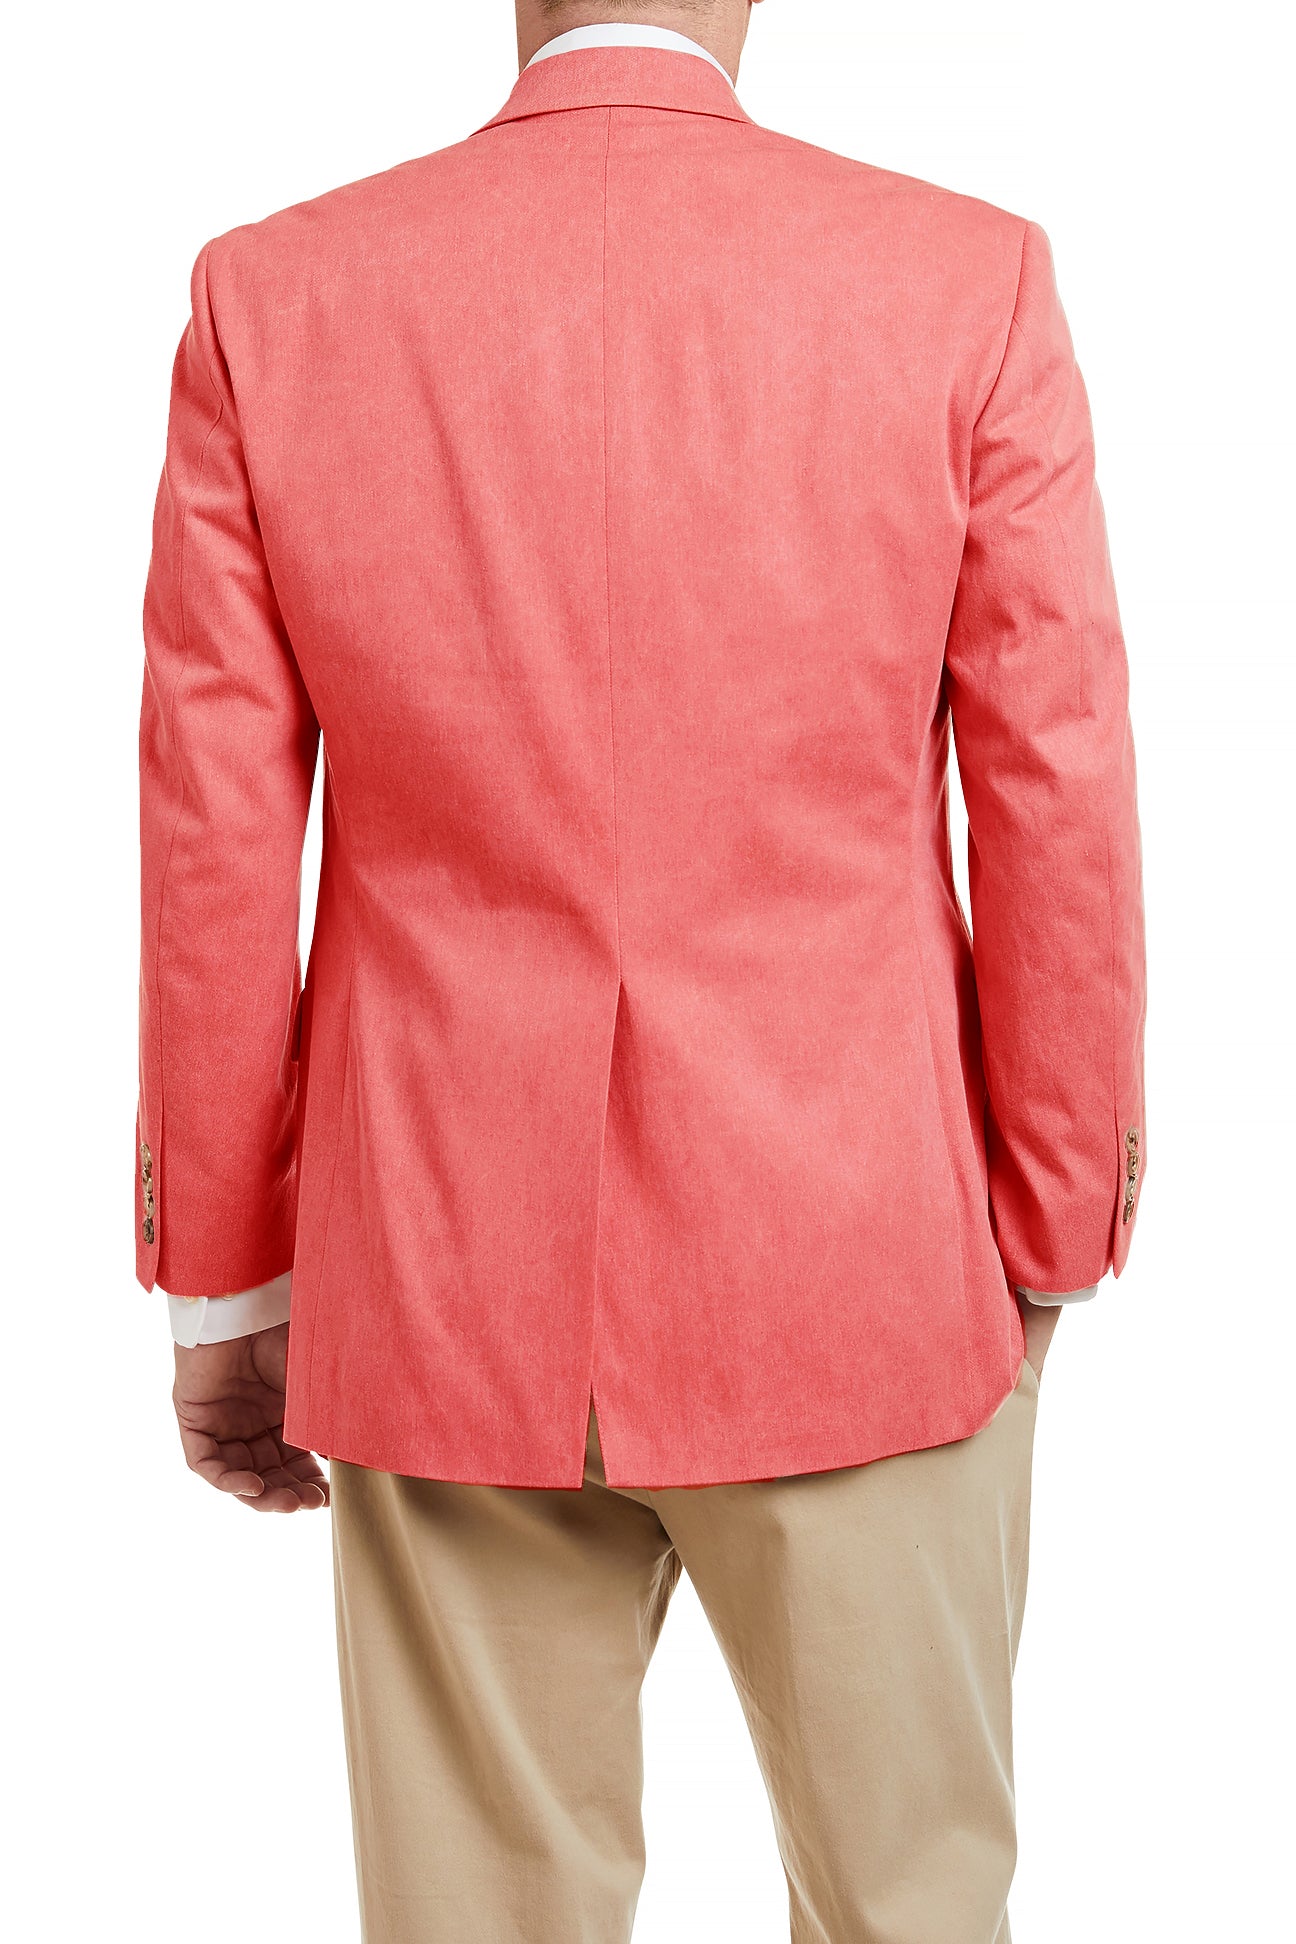 Murray's Toggery Nantucket Reds® M Crest Sportcoat MENS OUTERWEAR Murray's Toggery Shop